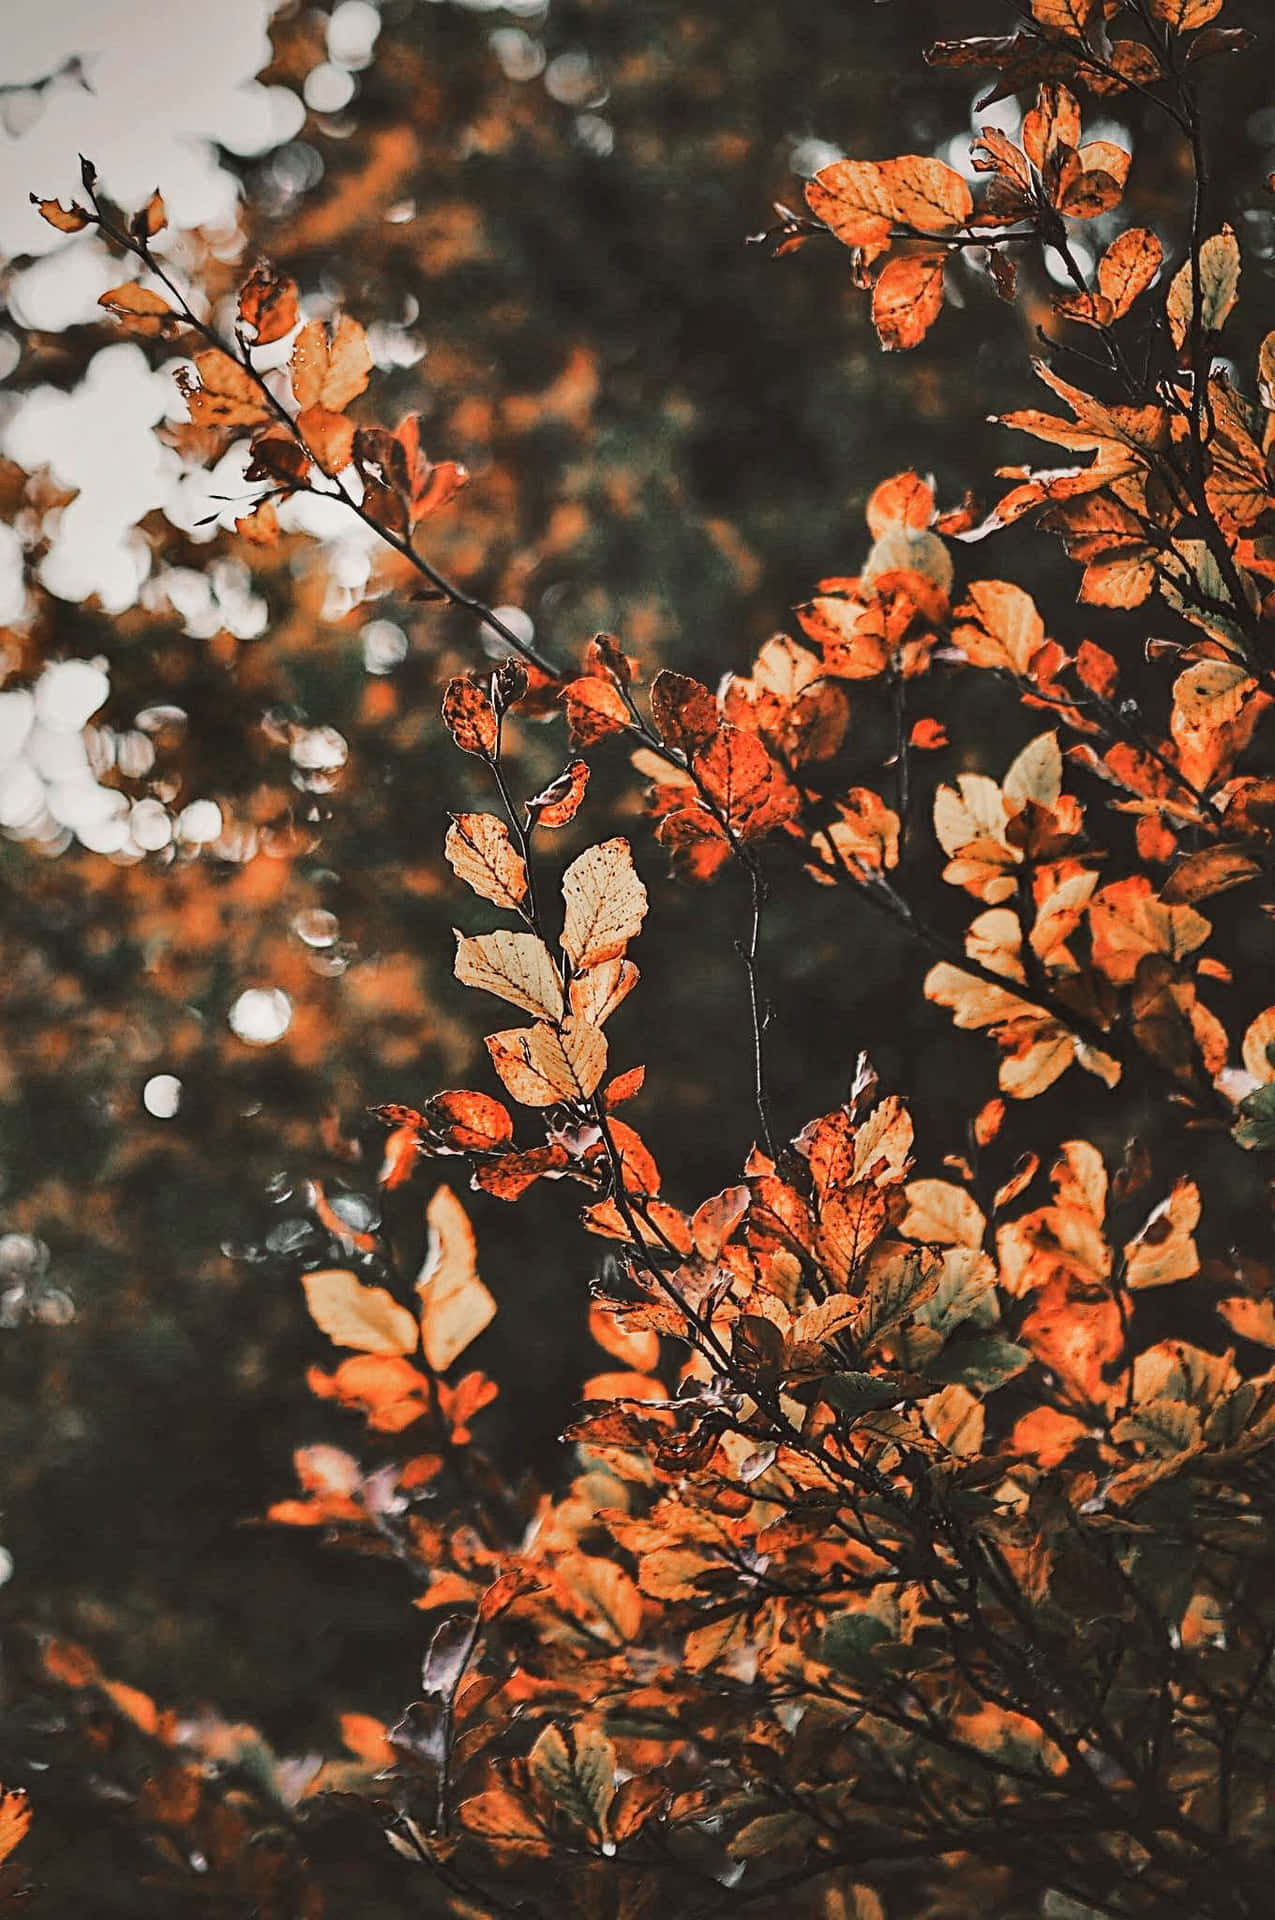 "Take in the beauty of autumn with the colorful leaves of Aesthetic Fall."